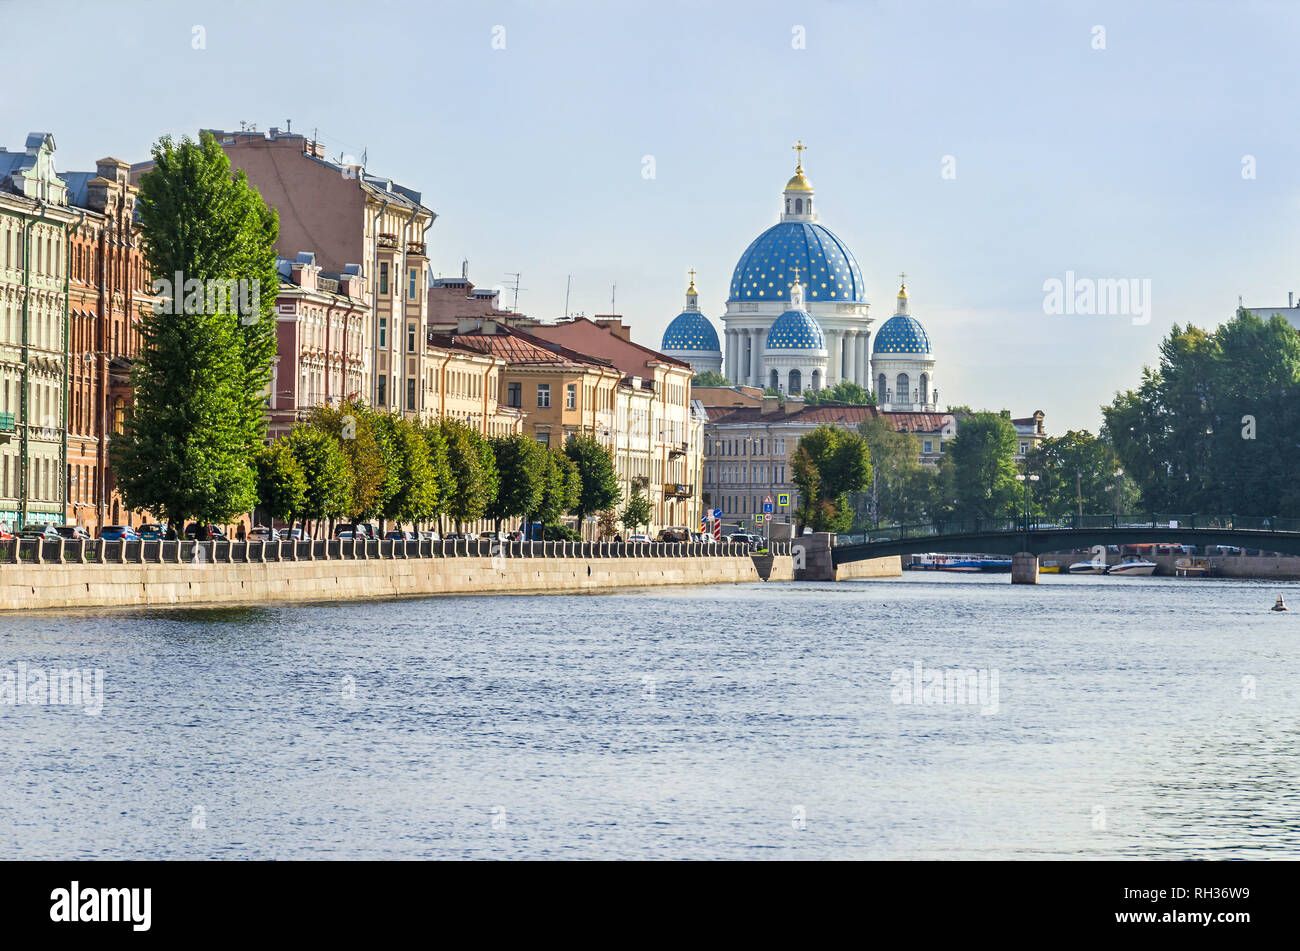 Saint Petersburg, Russia -  September 9, 2018: Fontanka river embankment, the English Bridge and the Trinity Cathedral, sometimes called the Troitsky  Stock Photo